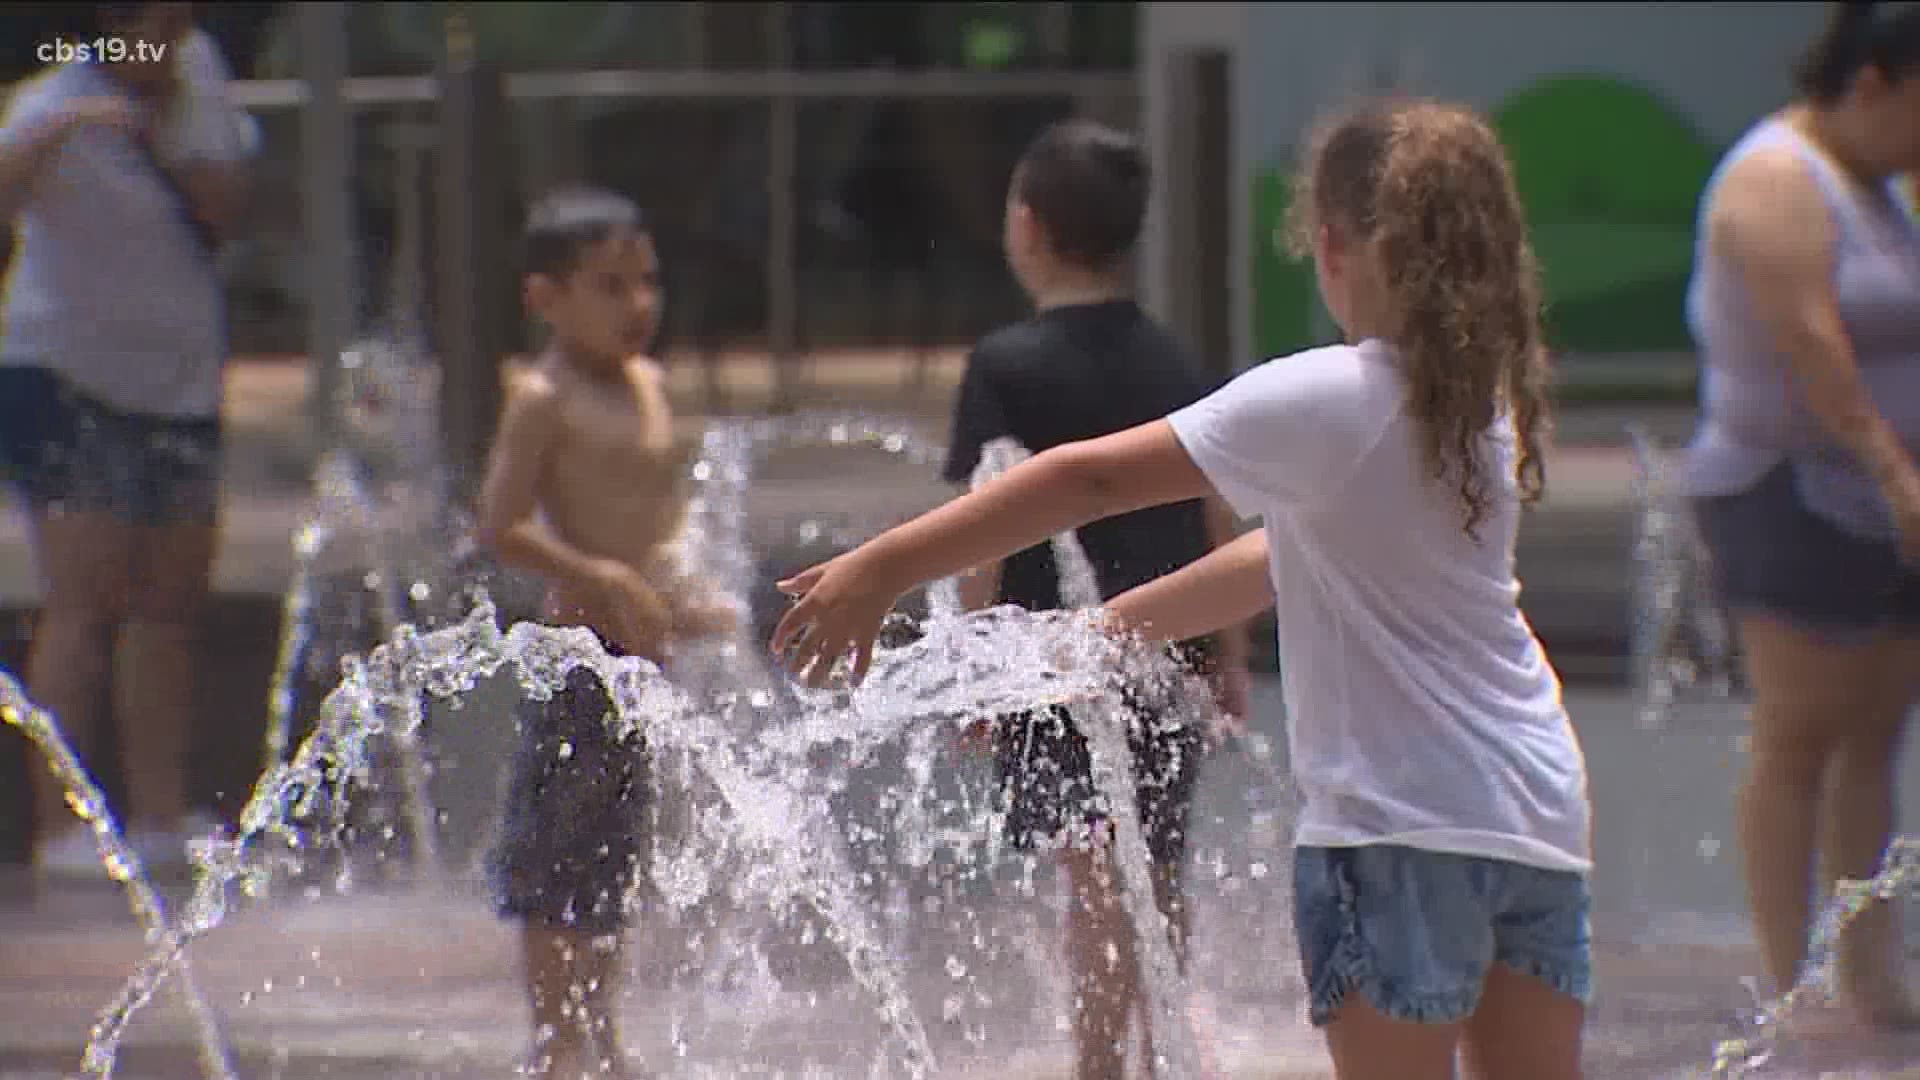 When kids are out playing in the sun, Longview Fire Marshal Kevin May says staying hydrated and avoiding burns is the last thing on their minds.